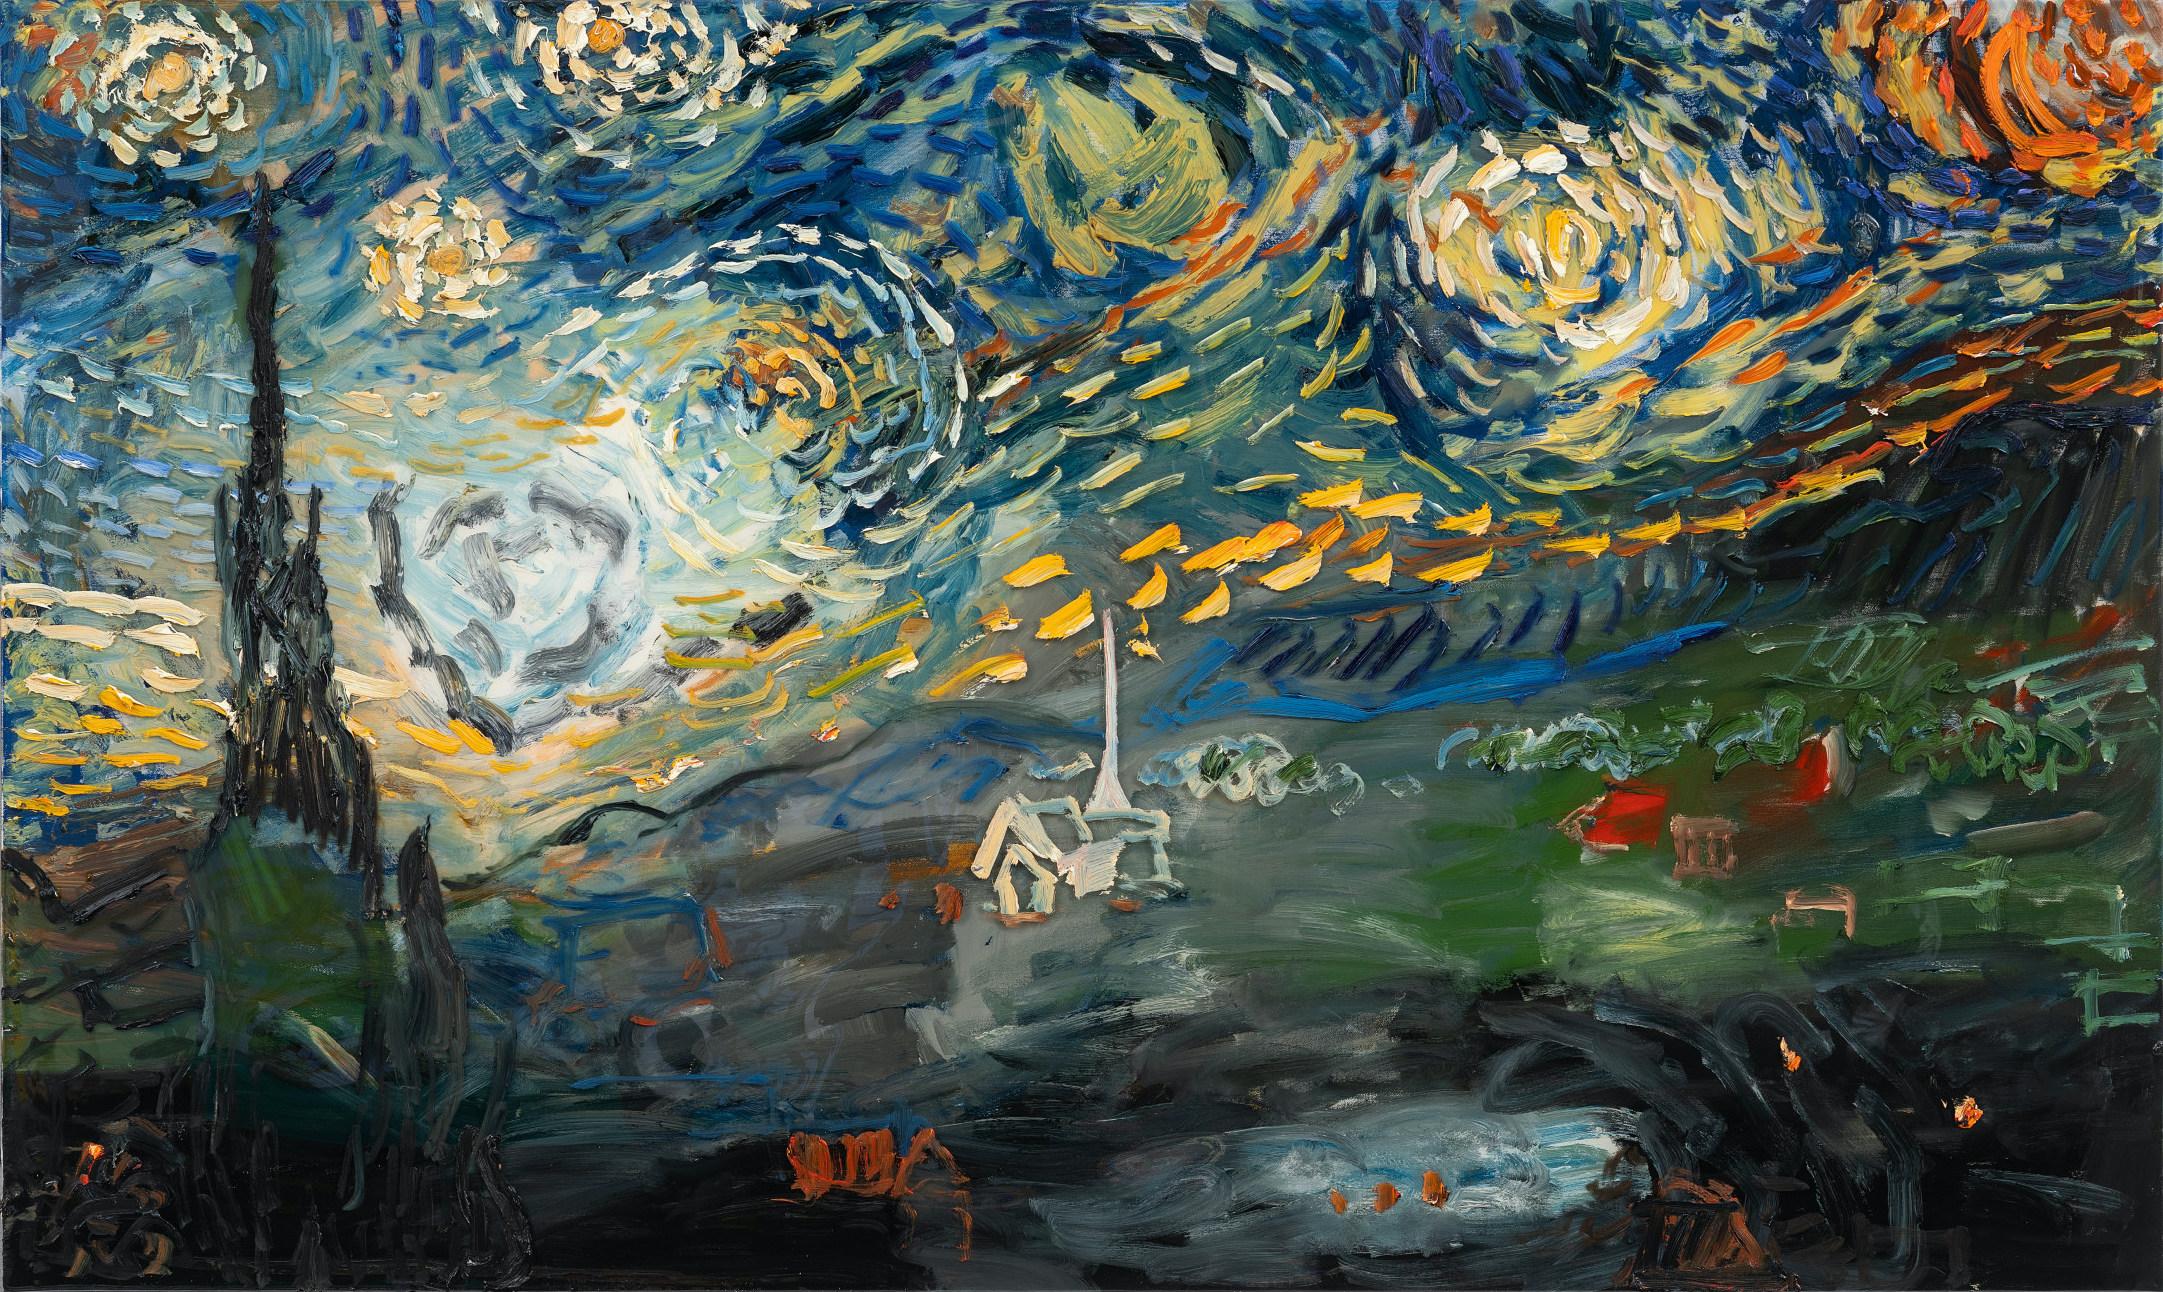 Darius Yektai Abstract Painting - "Starry Night 2"  Neo Abstract Expressionist take on Van Gogh's famous painting